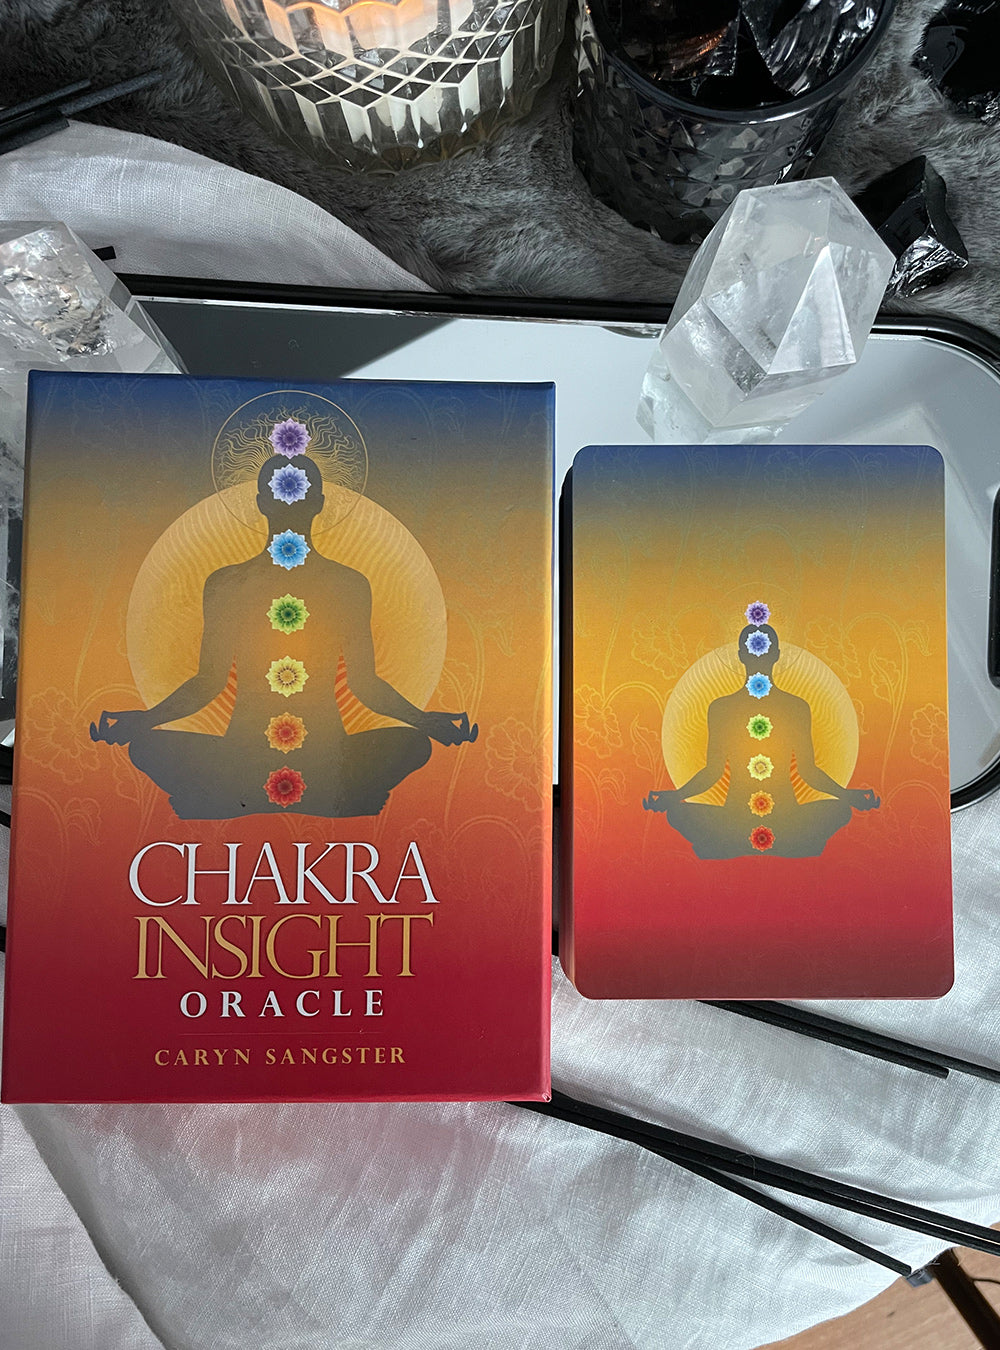 Chakra Insight Oracle cards